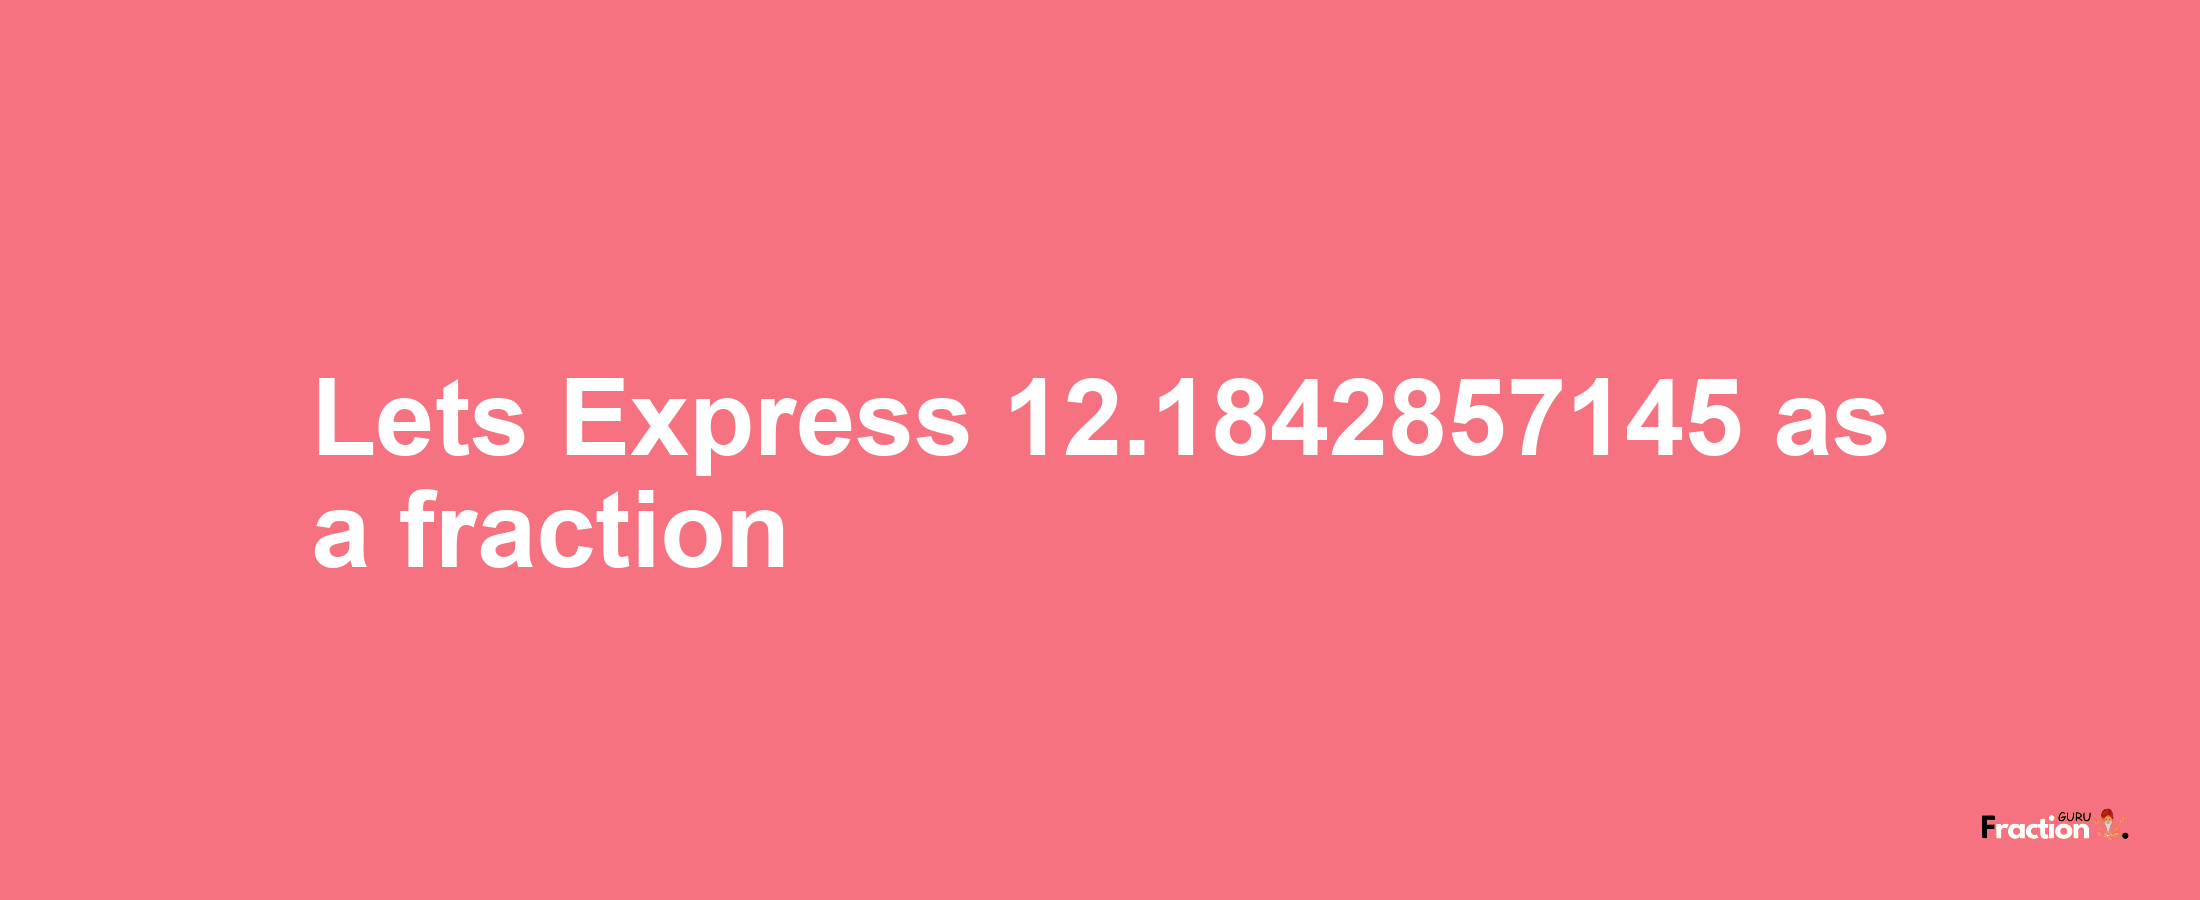 Lets Express 12.1842857145 as afraction